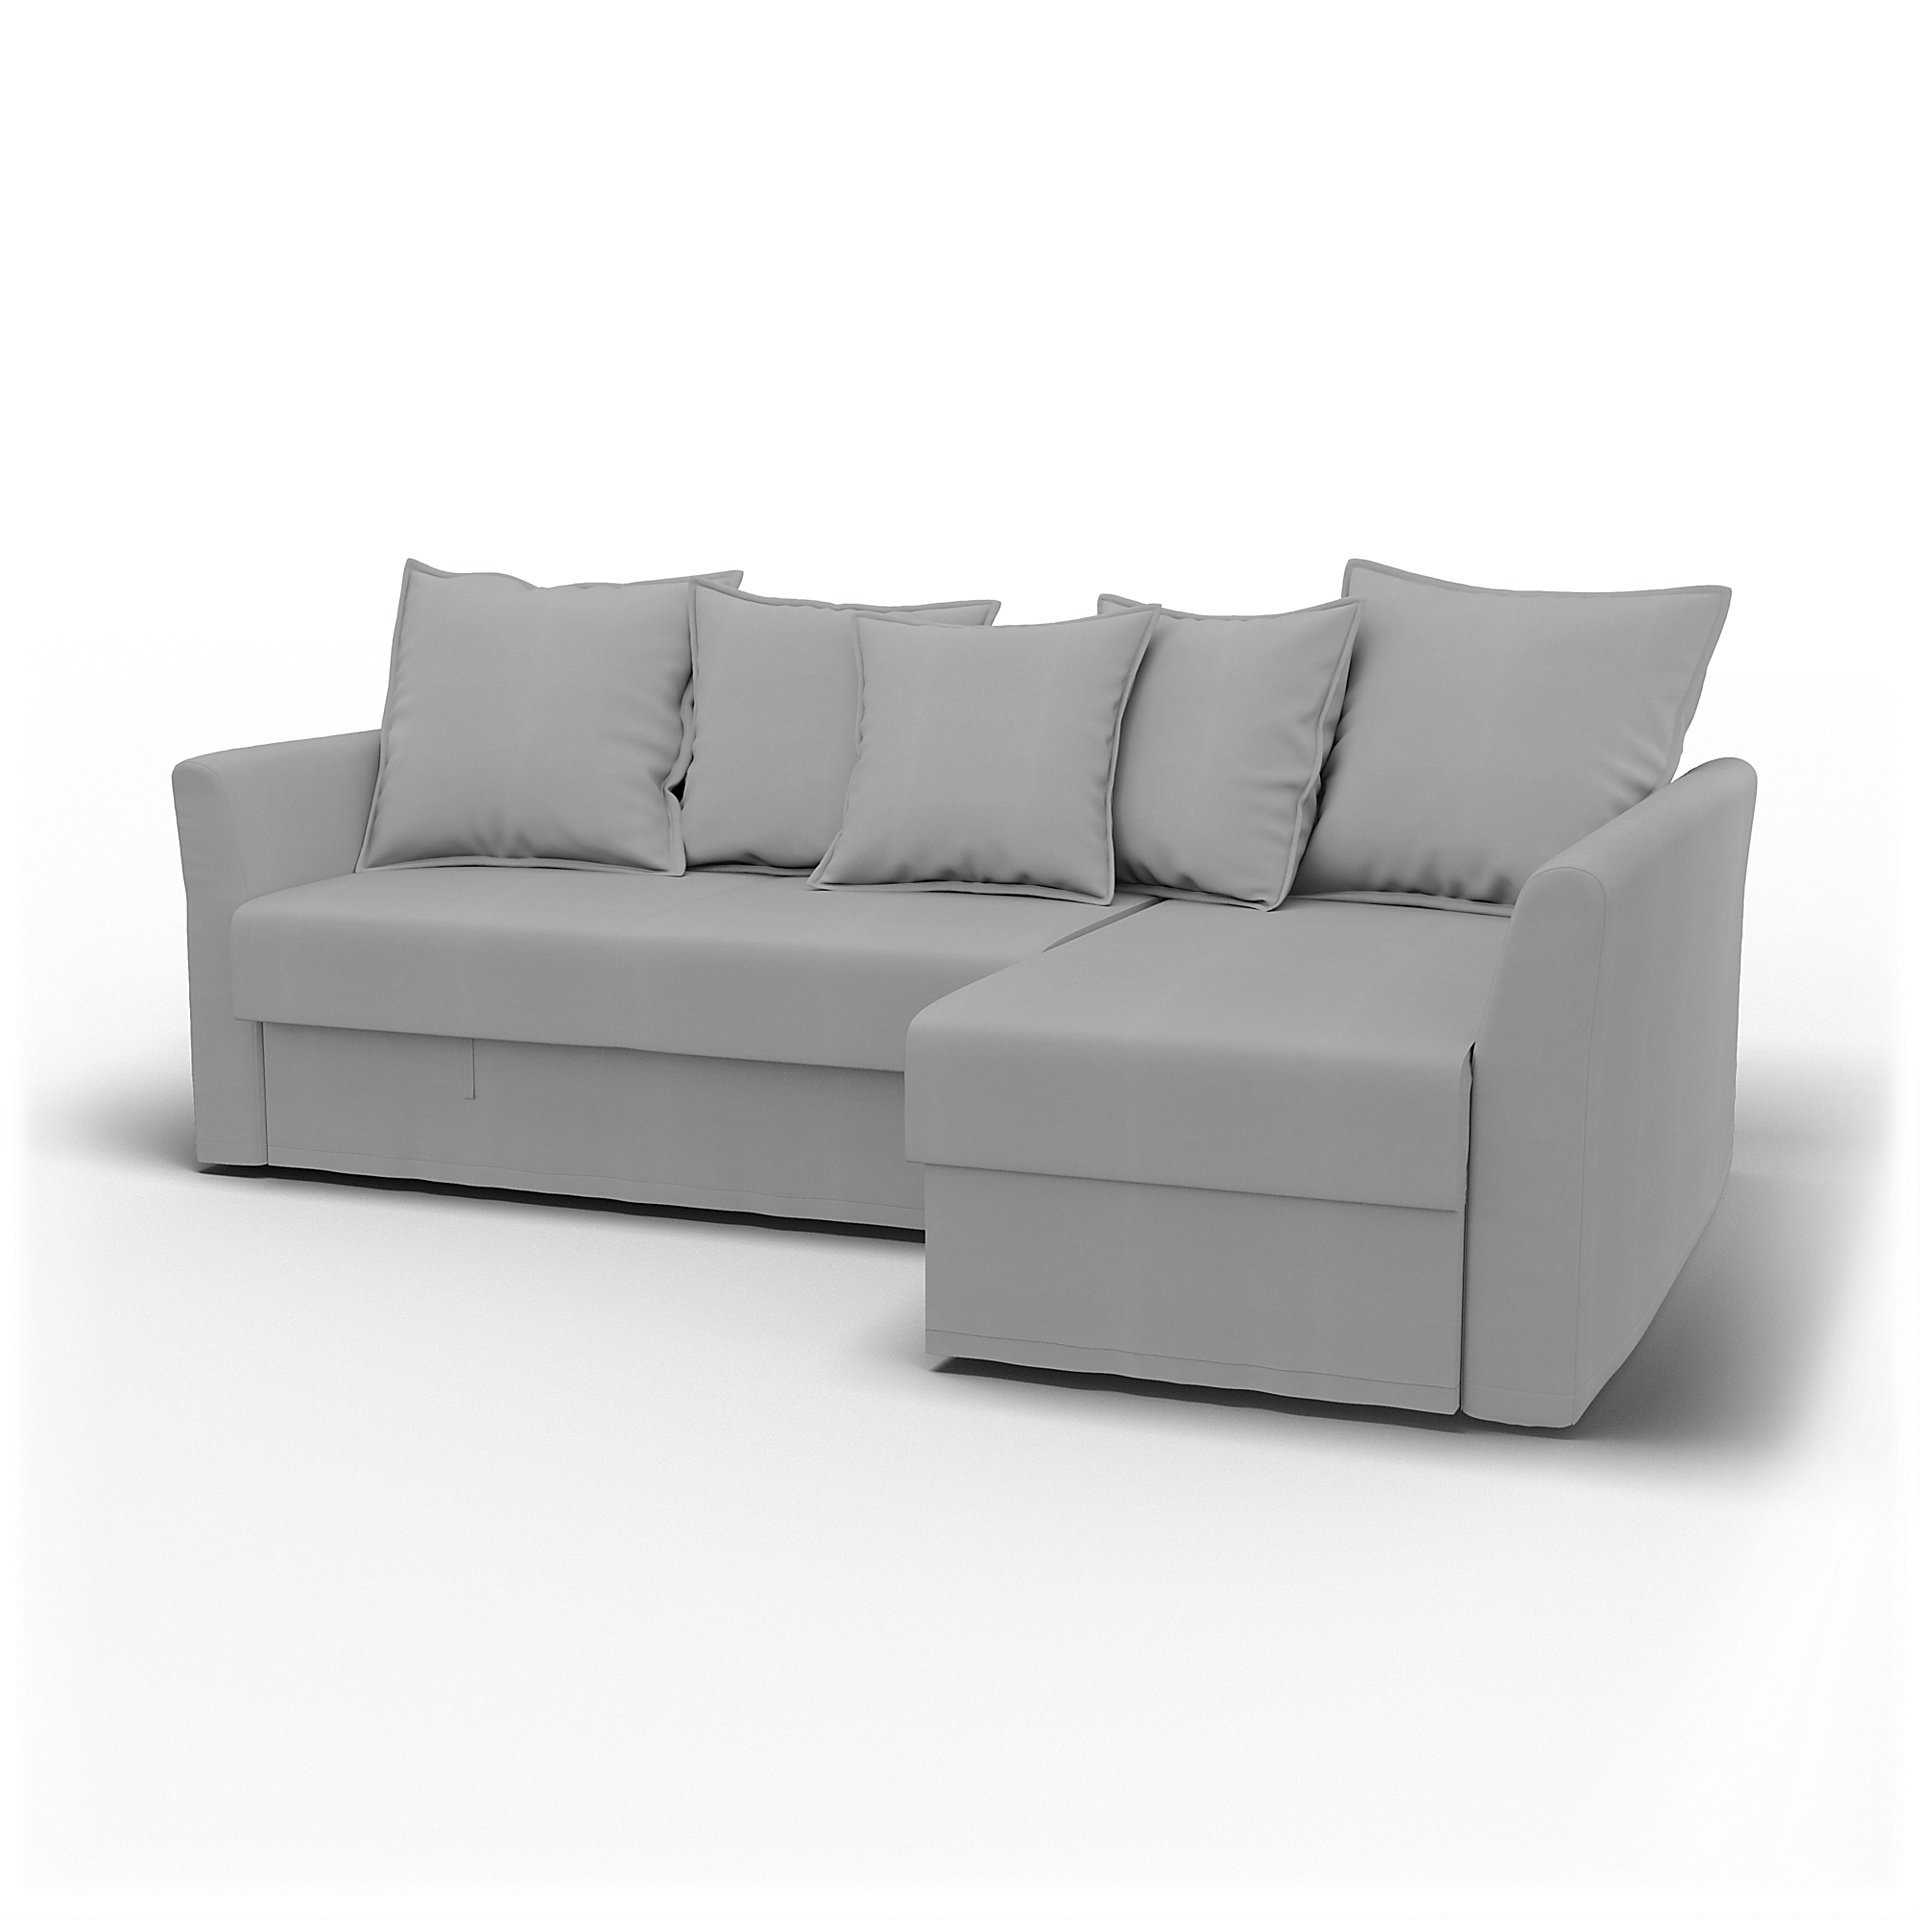 IKEA - Holmsund Sofabed with Chaiselongue, Silver Grey, Cotton - Bemz